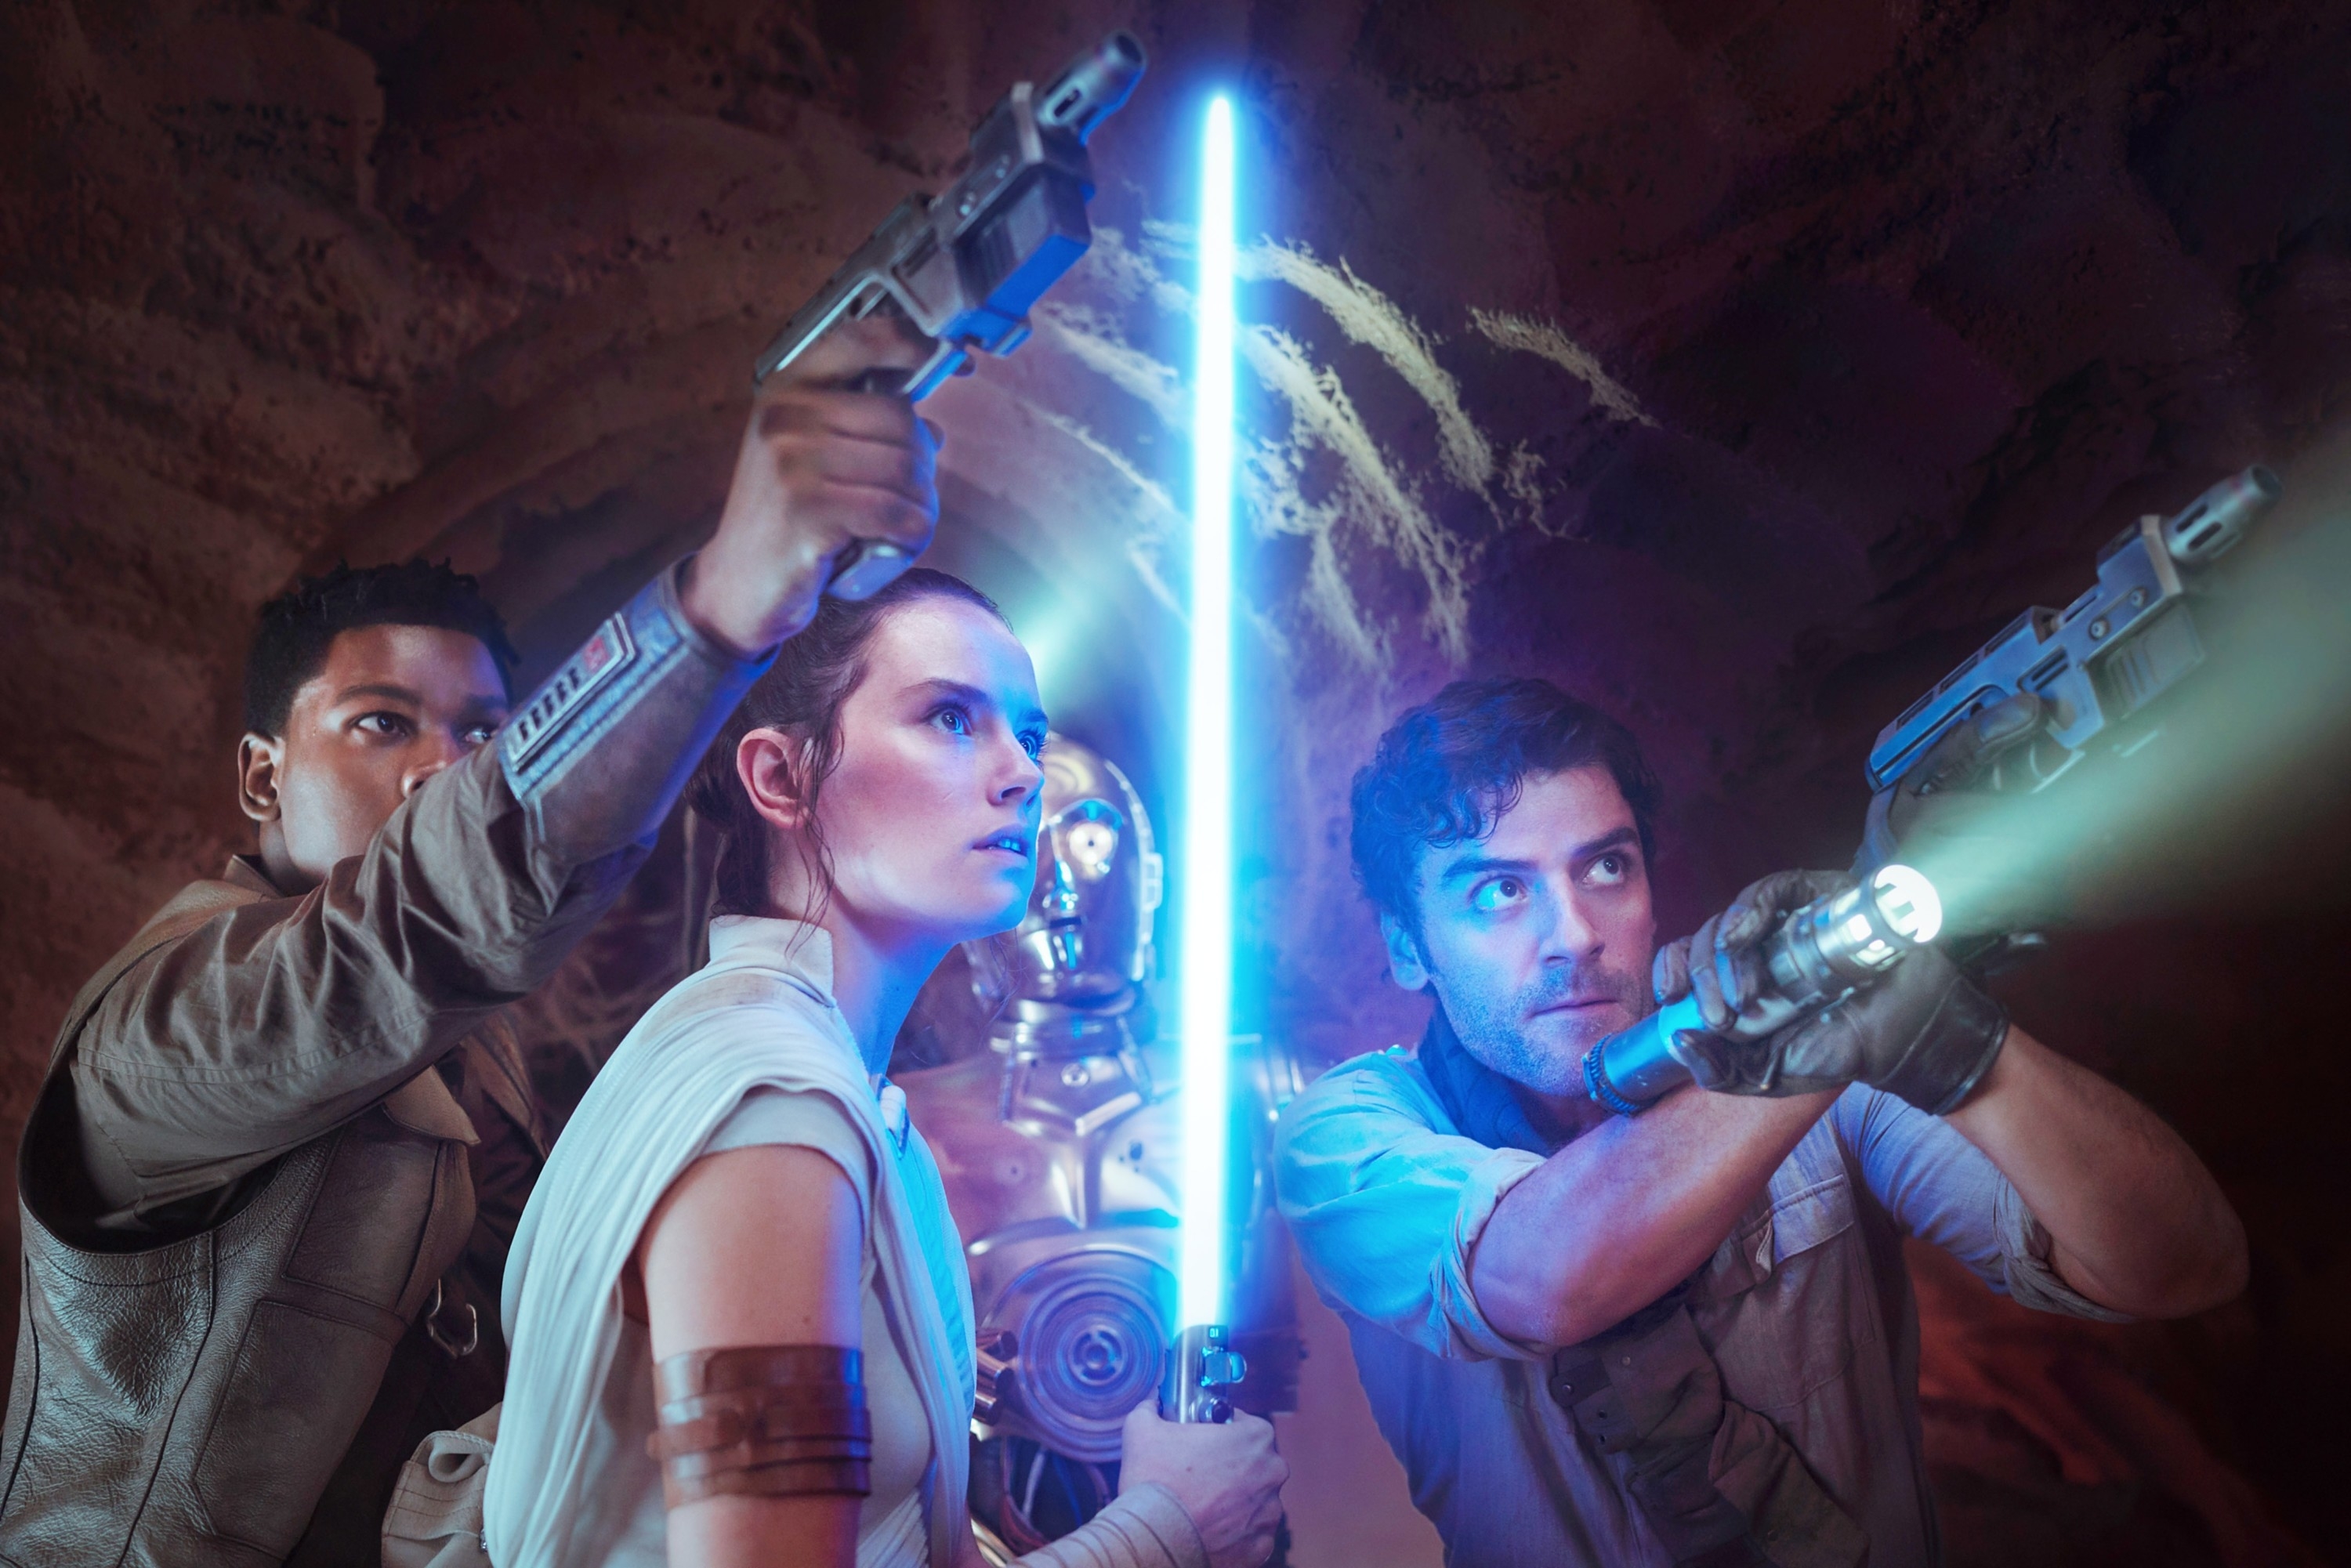 John Boyega, Daisy Ridley, and Oscar Isaac as their Star Wars characters ready for action. Ridley holds a lightsaber